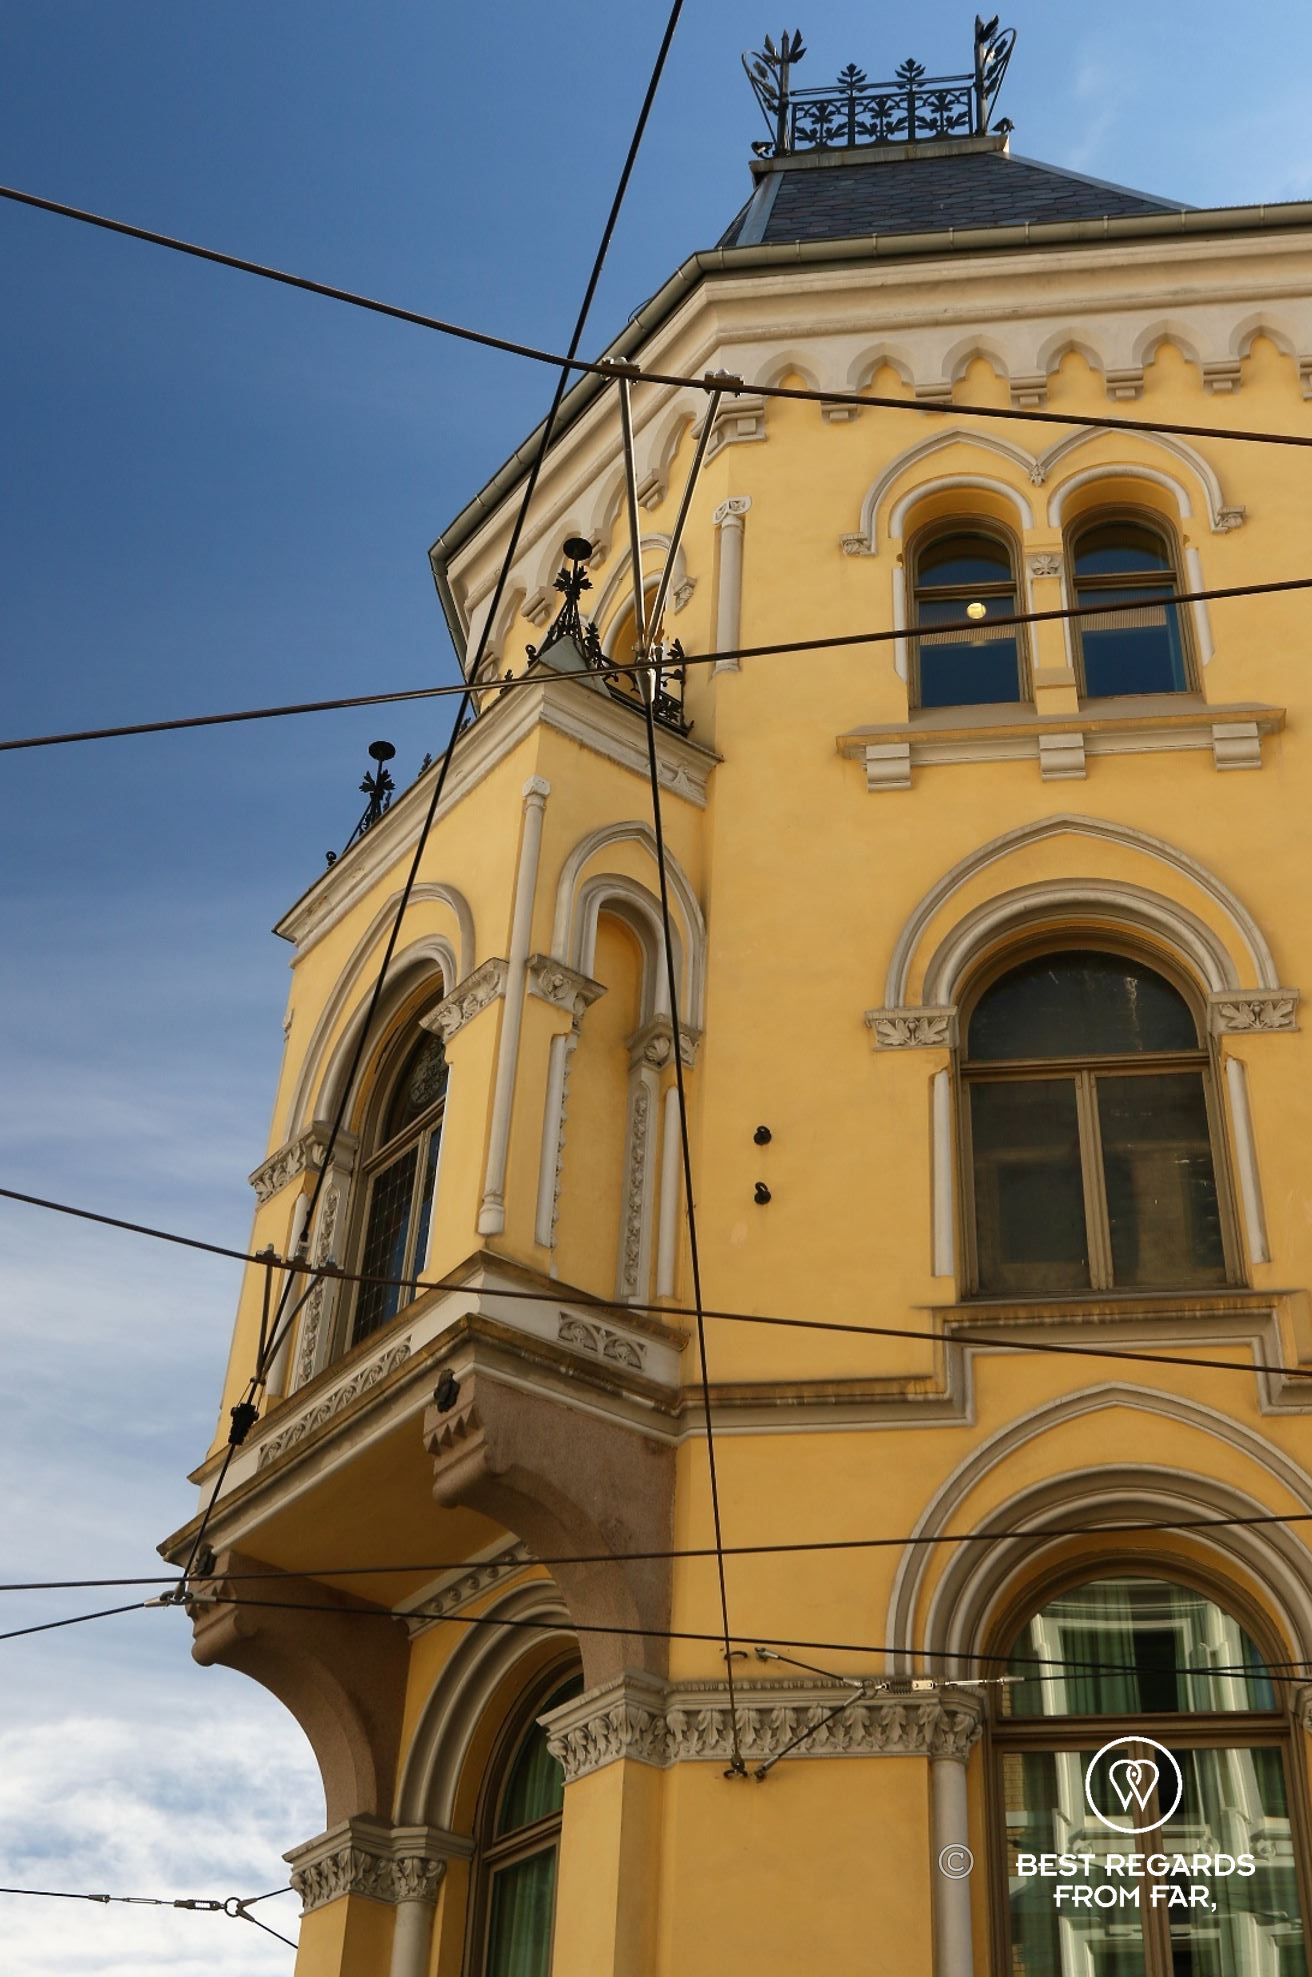 Classy yellow building, tram lines and blue skies, Oslo, Norway